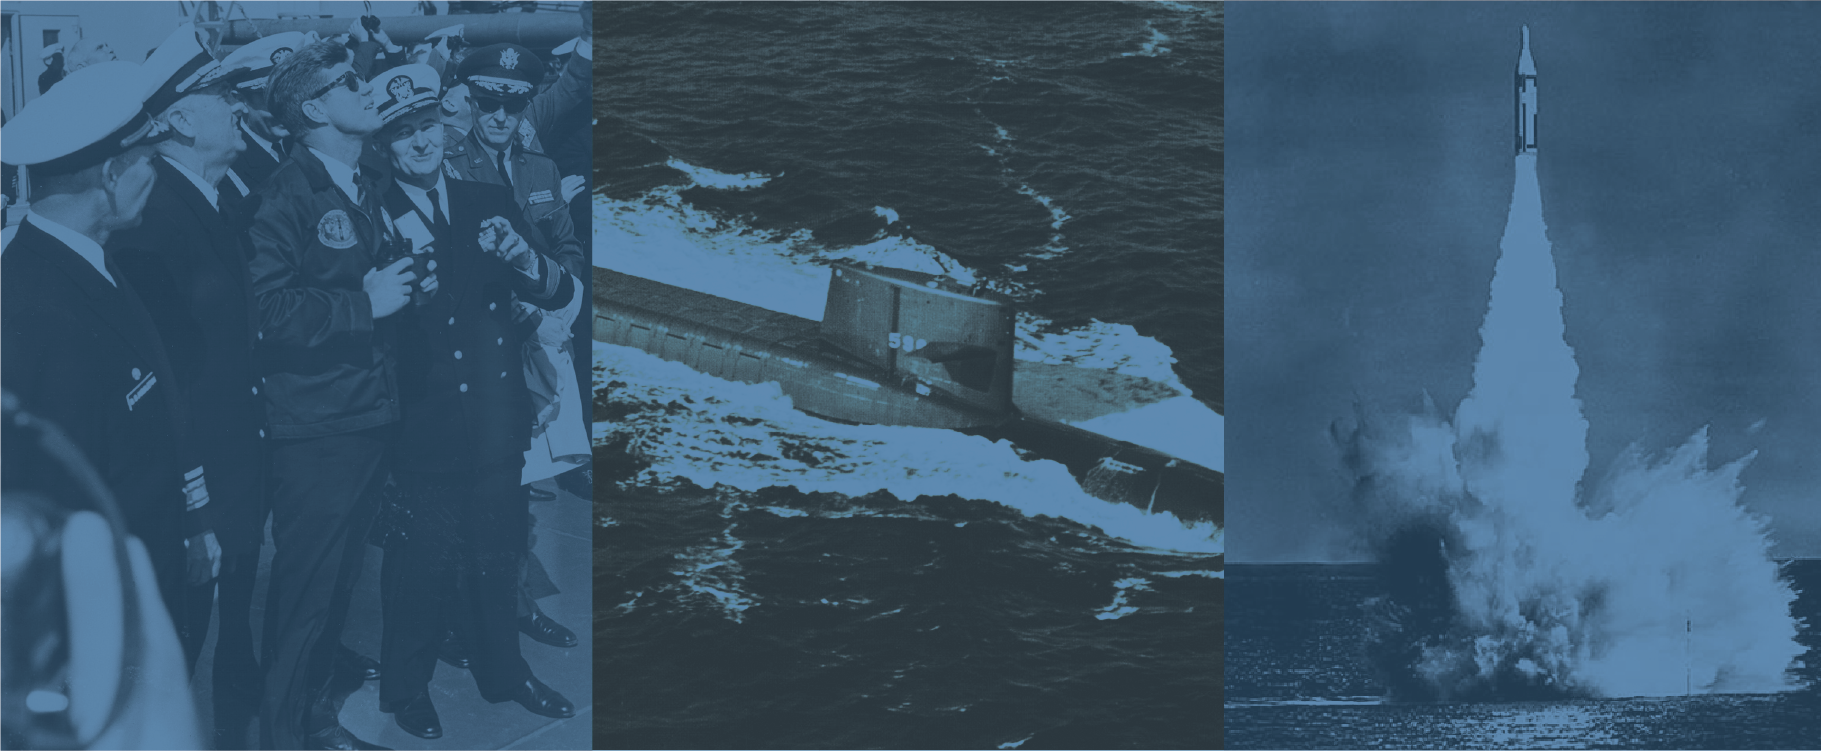 A one-page multi-use banner graphic representing Strategic Systems Programs History. This graphic was created for use on the new SSP website but can also be utilized as part of a recruitment materials or mission advertisement as appropriate (U.S. Navy Graphic by Oliver Thompson).